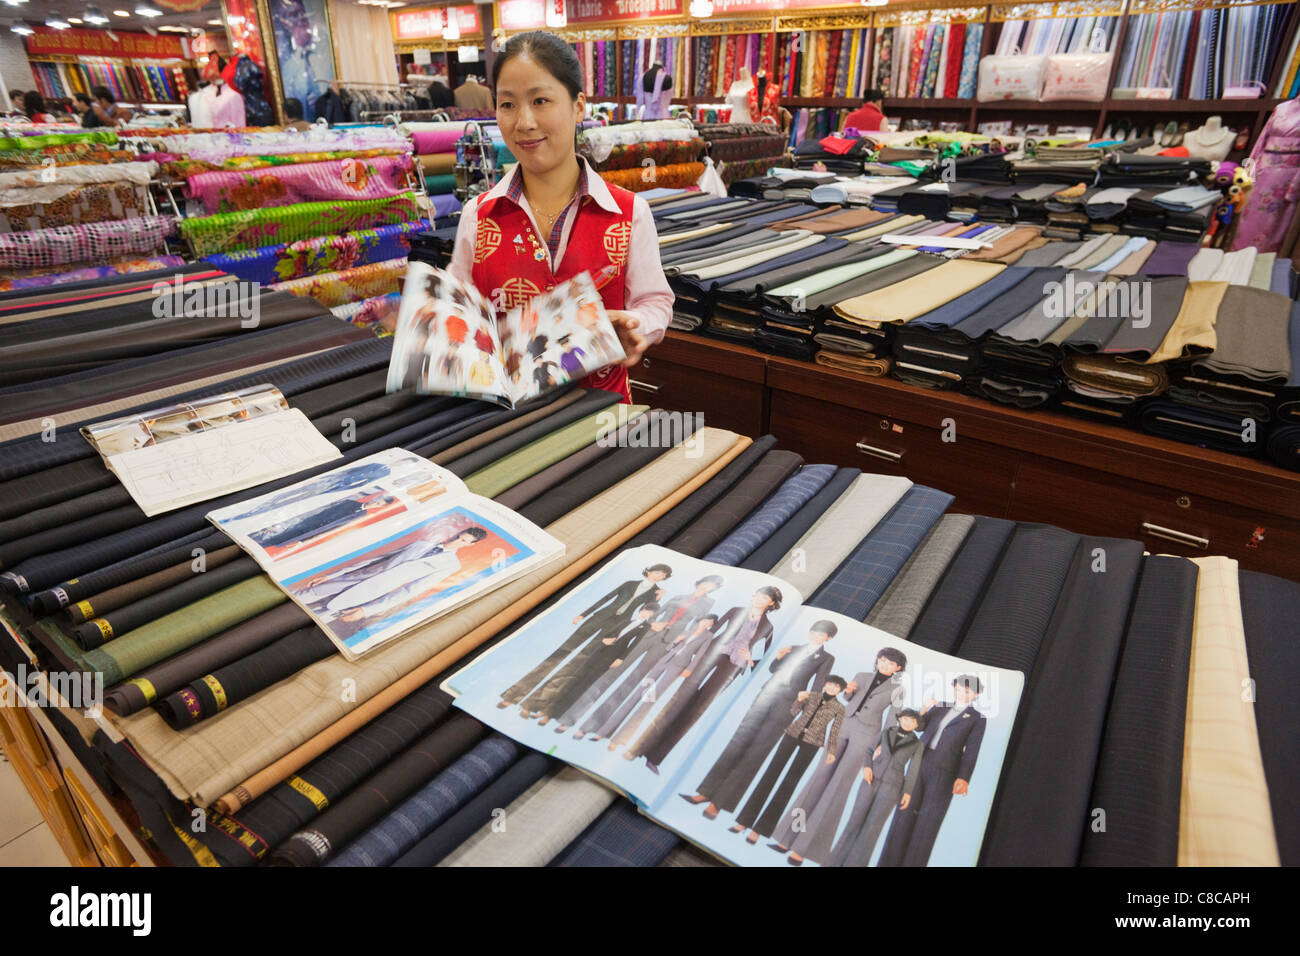 China, Beijing, The Silk Market, Tailor and Fabric Shop Stock Photo